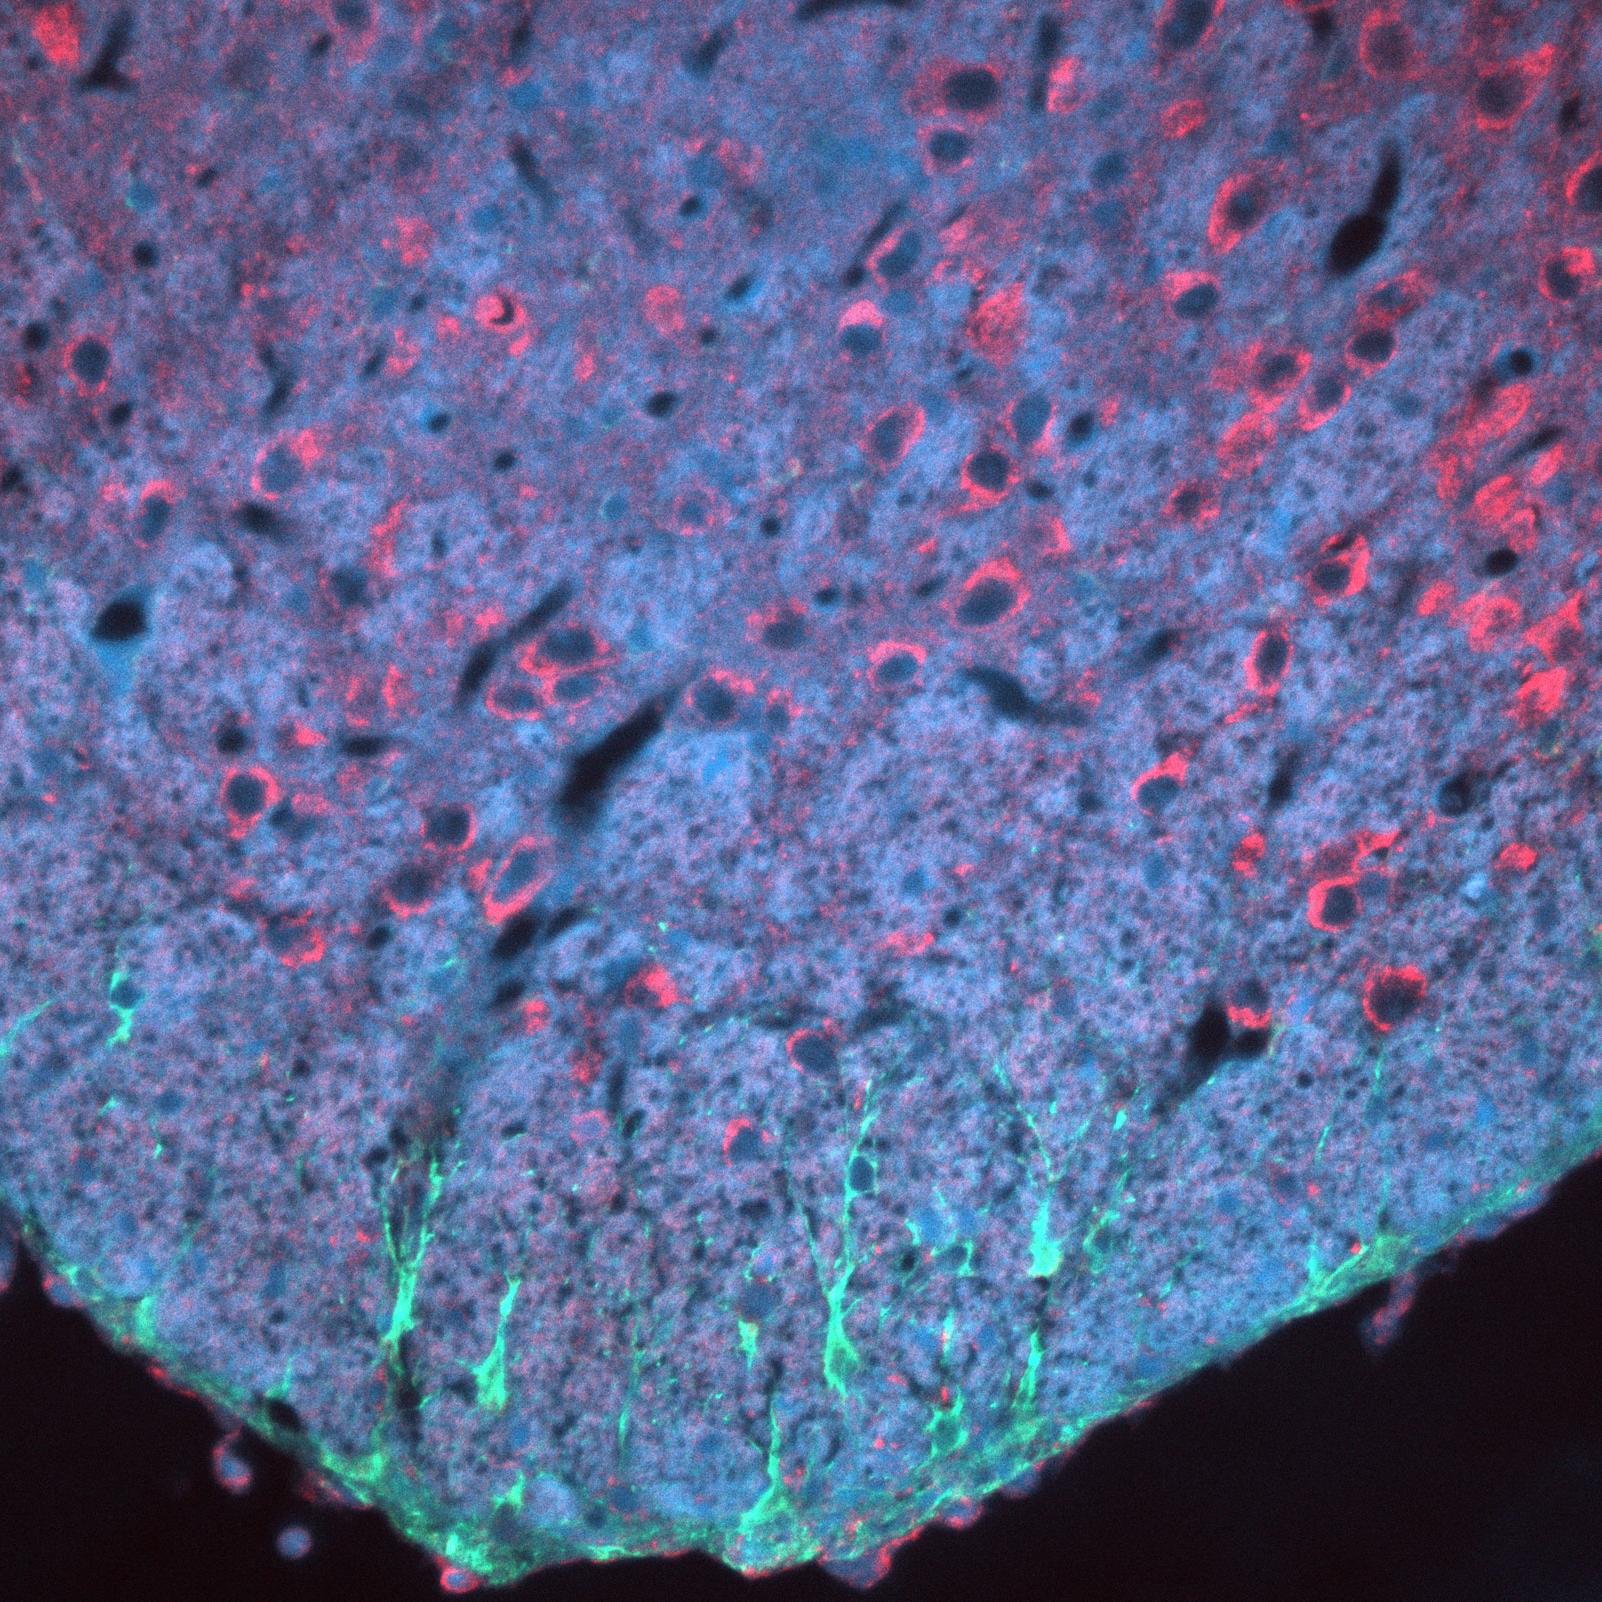 Antibody staining of mouse brain section. Cell nuclei (blue), astrocytes (green), cytokeratin (red), acquired with ZEISS Axio Imager, objective: EC Plan-NEOFLUAR 20x / 0.50